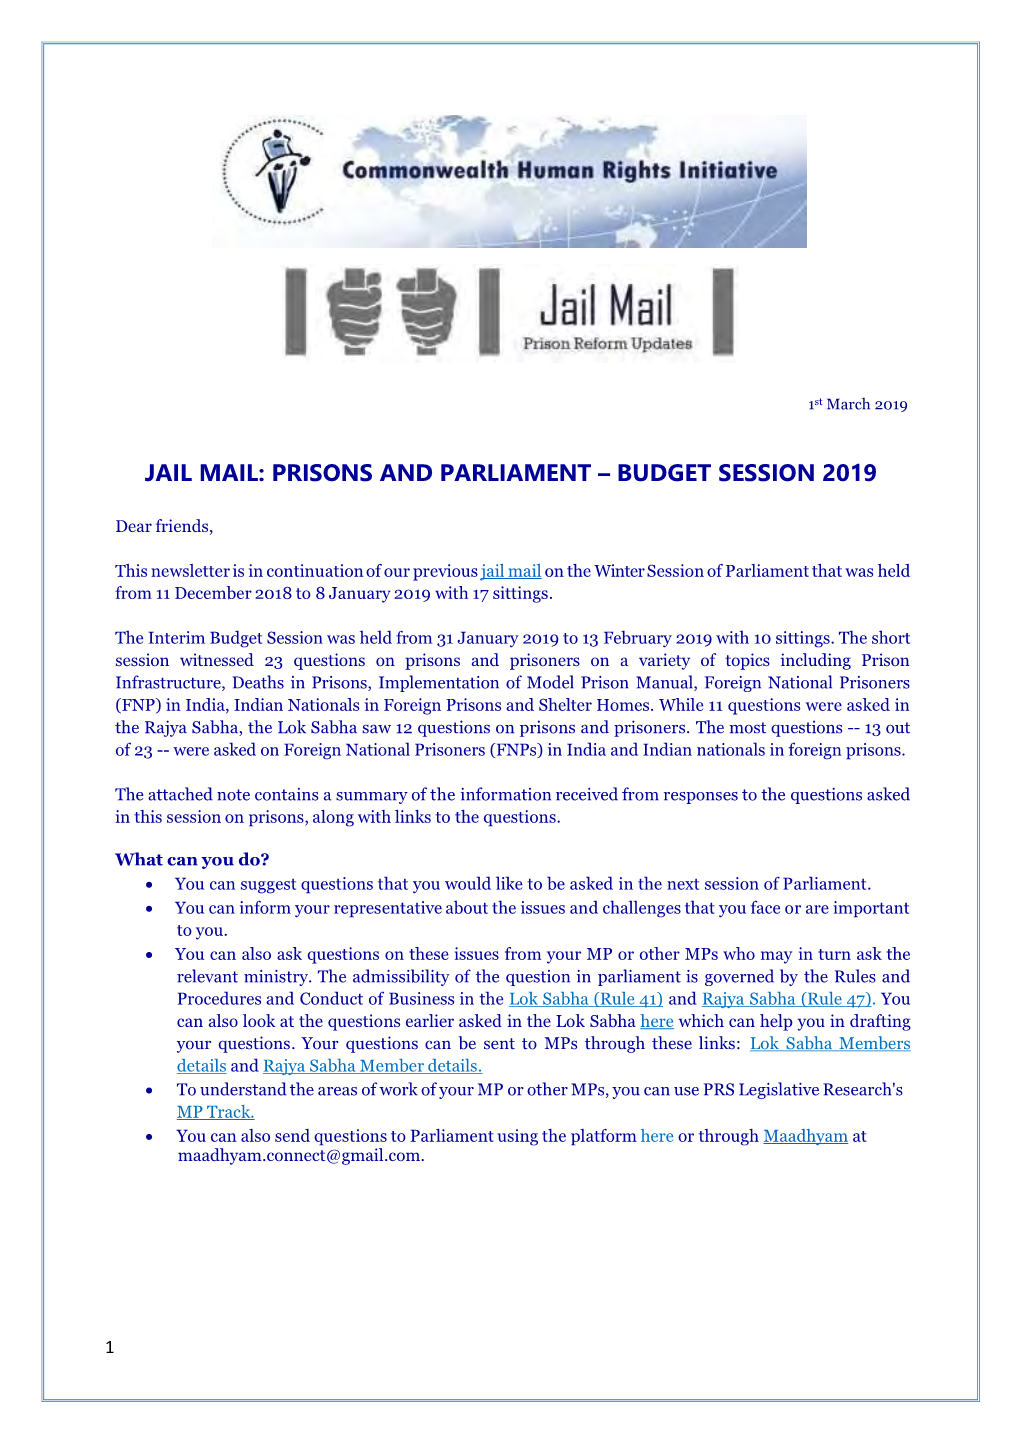 Jail Mail: Prisons and Parliament – Budget Session 2019